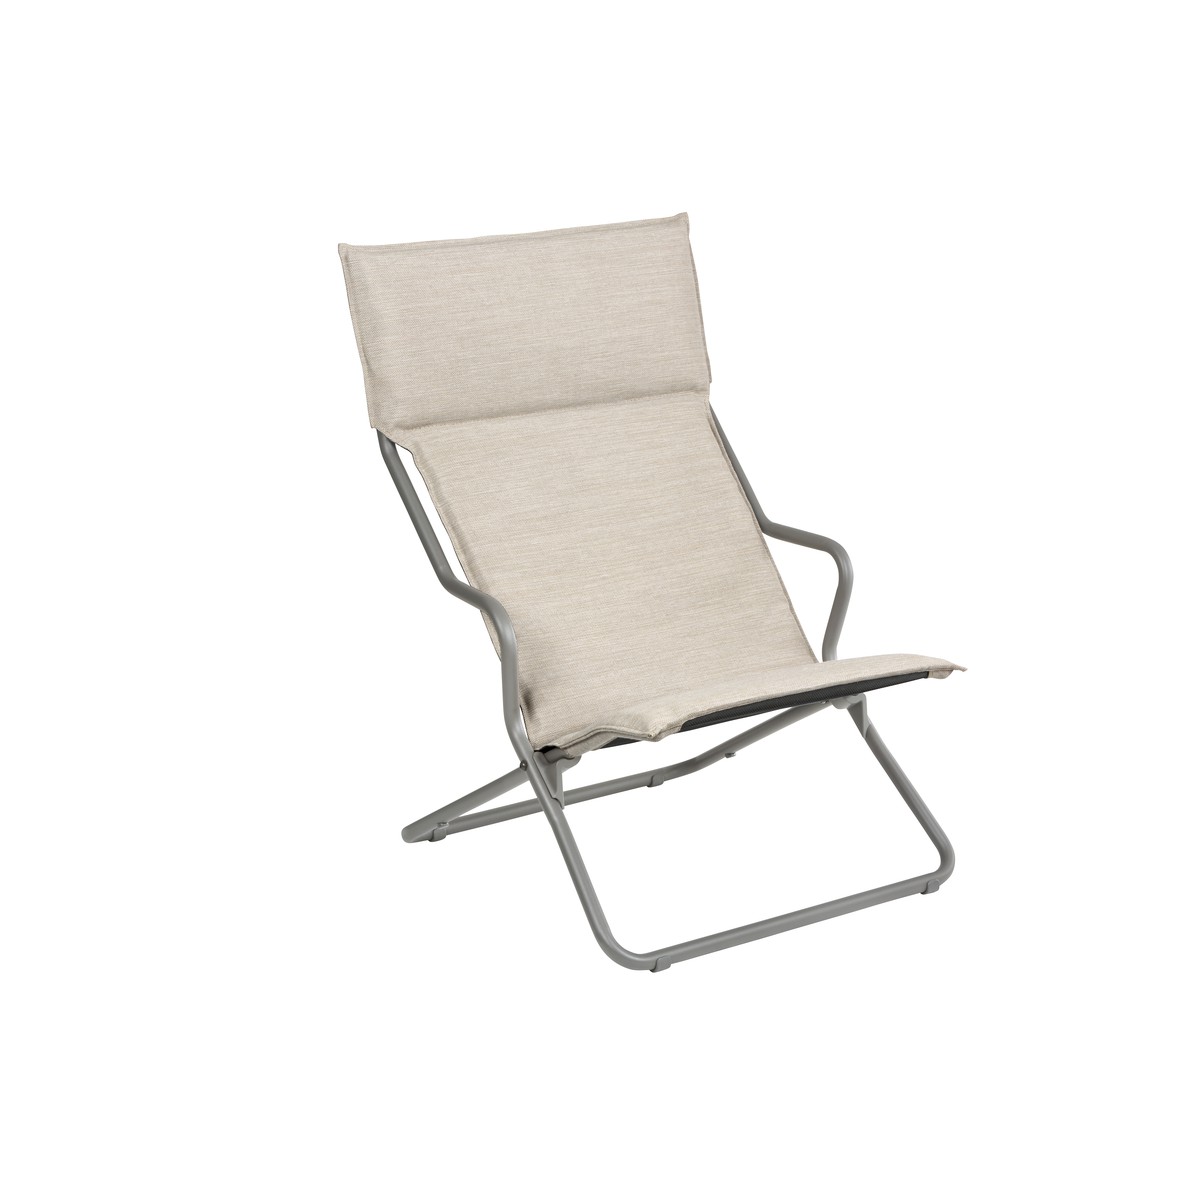 Lafuma Mobilier PRIVILEGE Fauteuil Relax Ancone Lounger Hedona Blanc argent 88x93x66.5cm